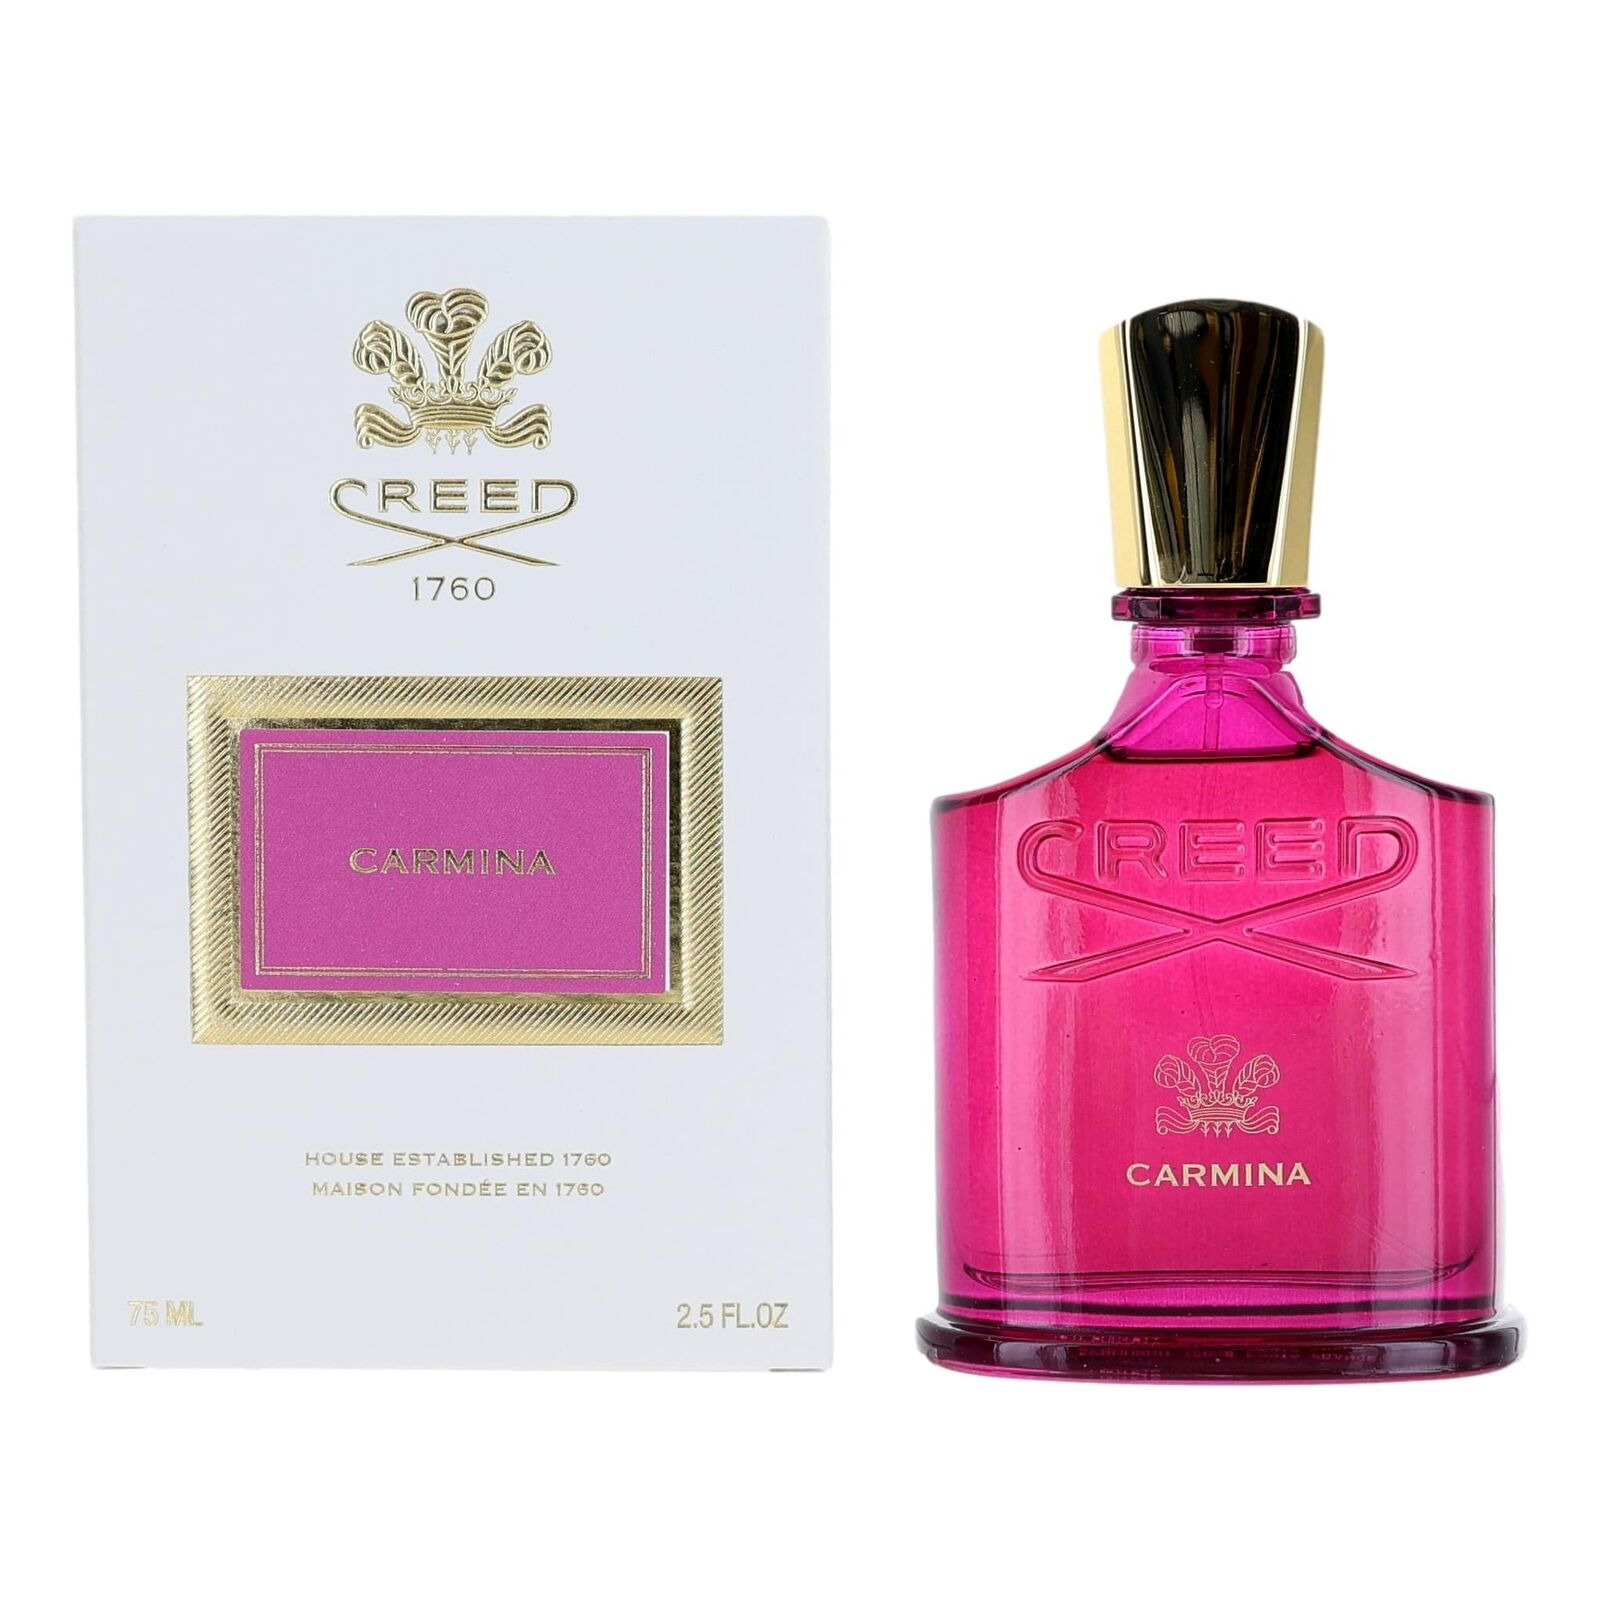 Carmina By Creed EDP 75ml 2.5 oz Spray For Women Gifts New In Sealed Box